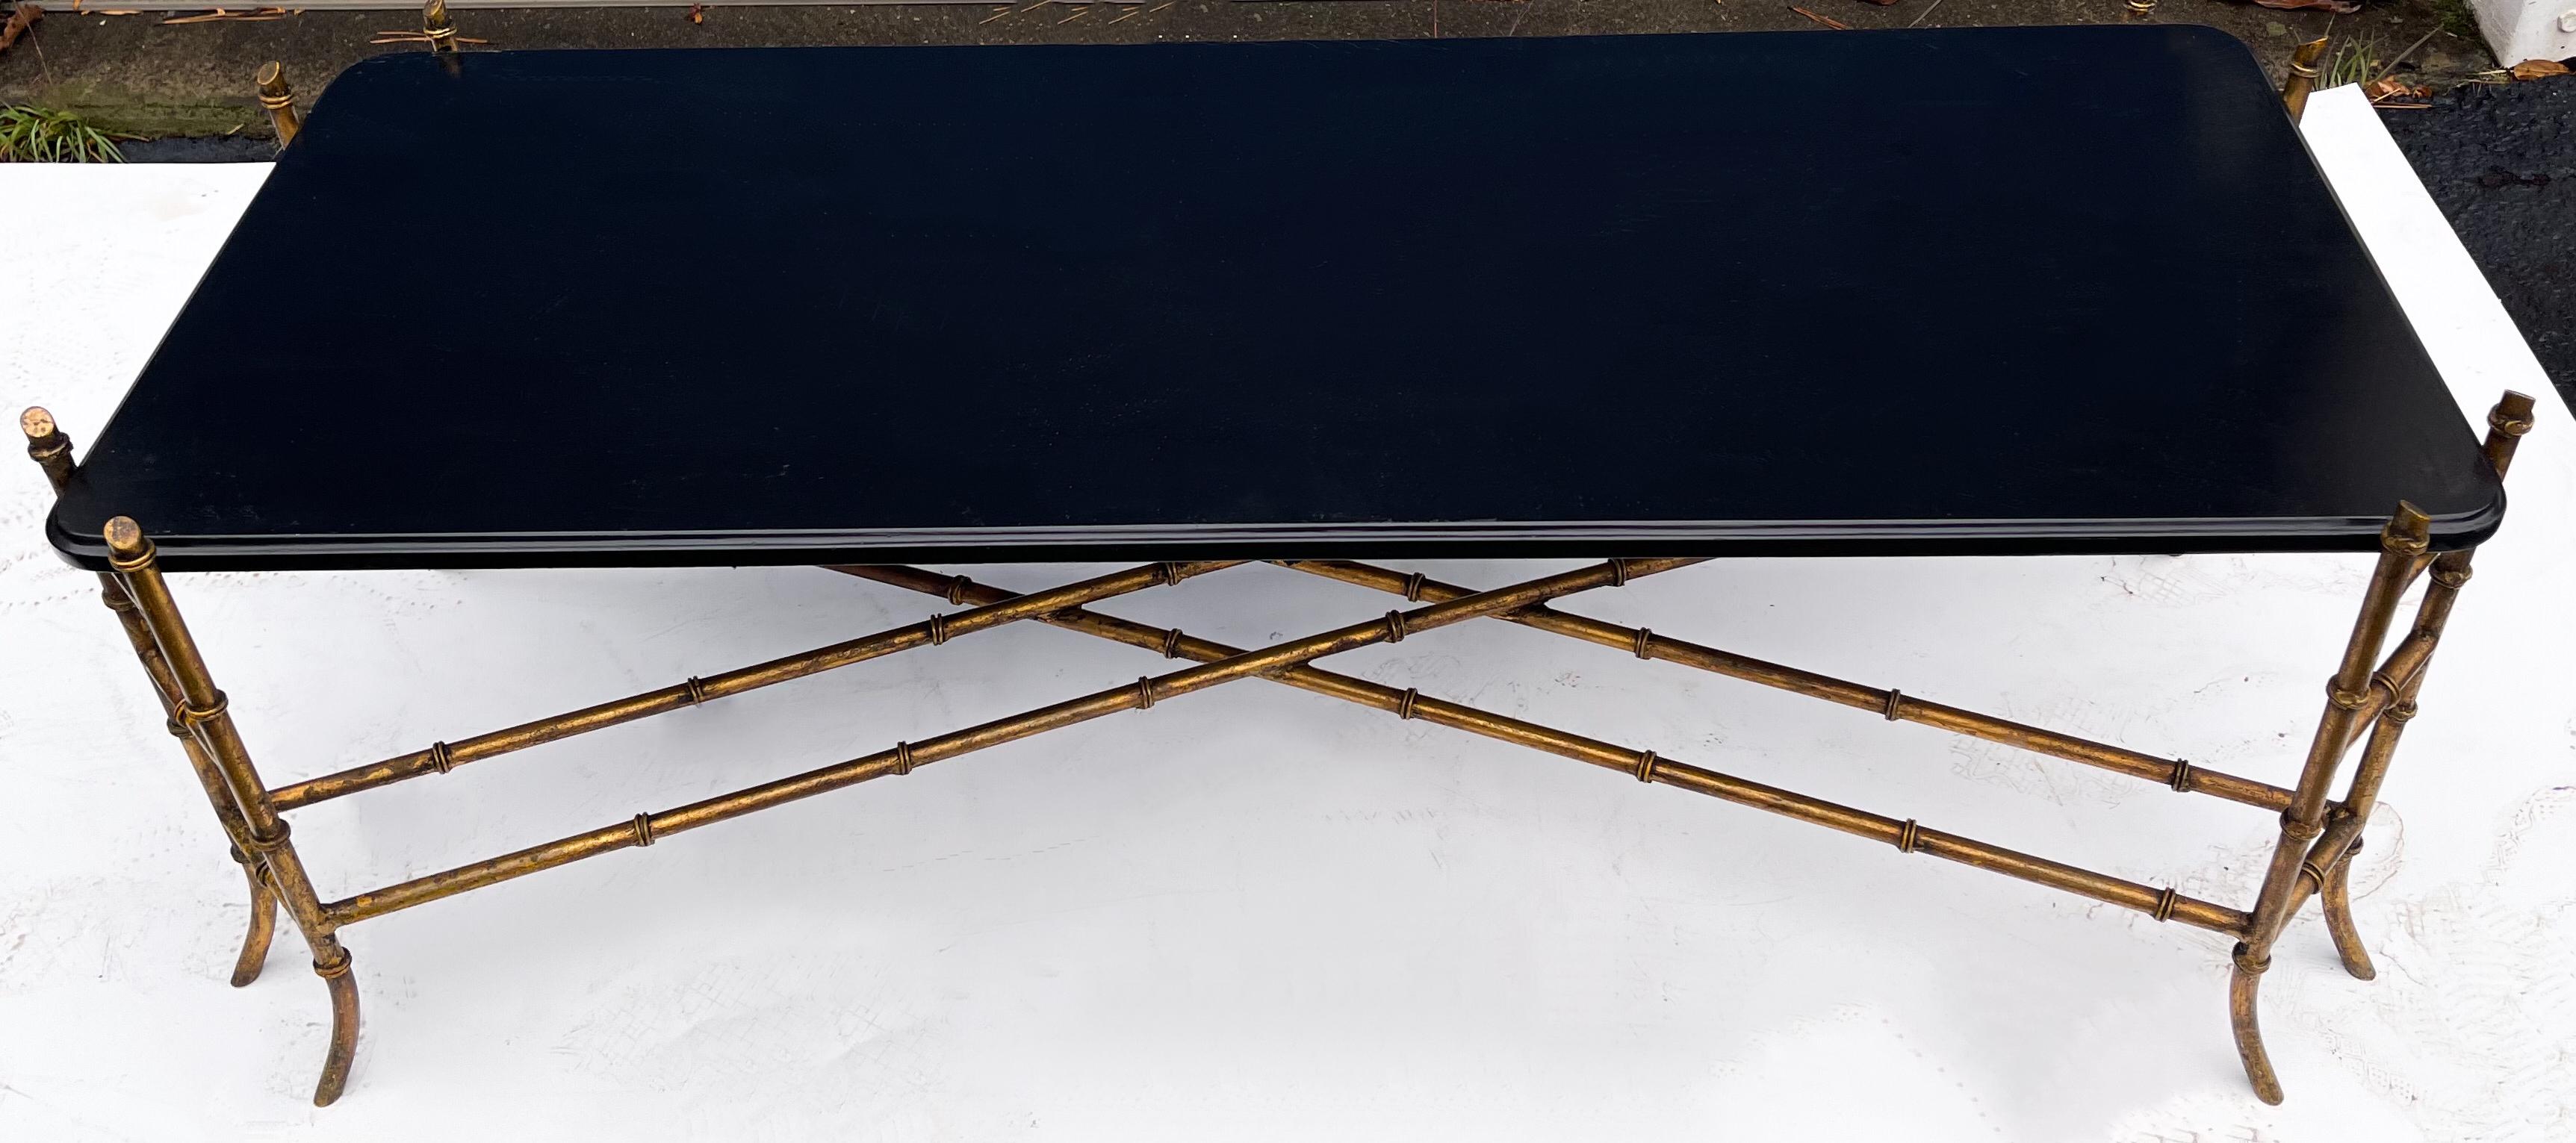 20th Century Italian Regency Maison Bagues Style Gilt Metal Faux Bamboo Coffee Table For Sale